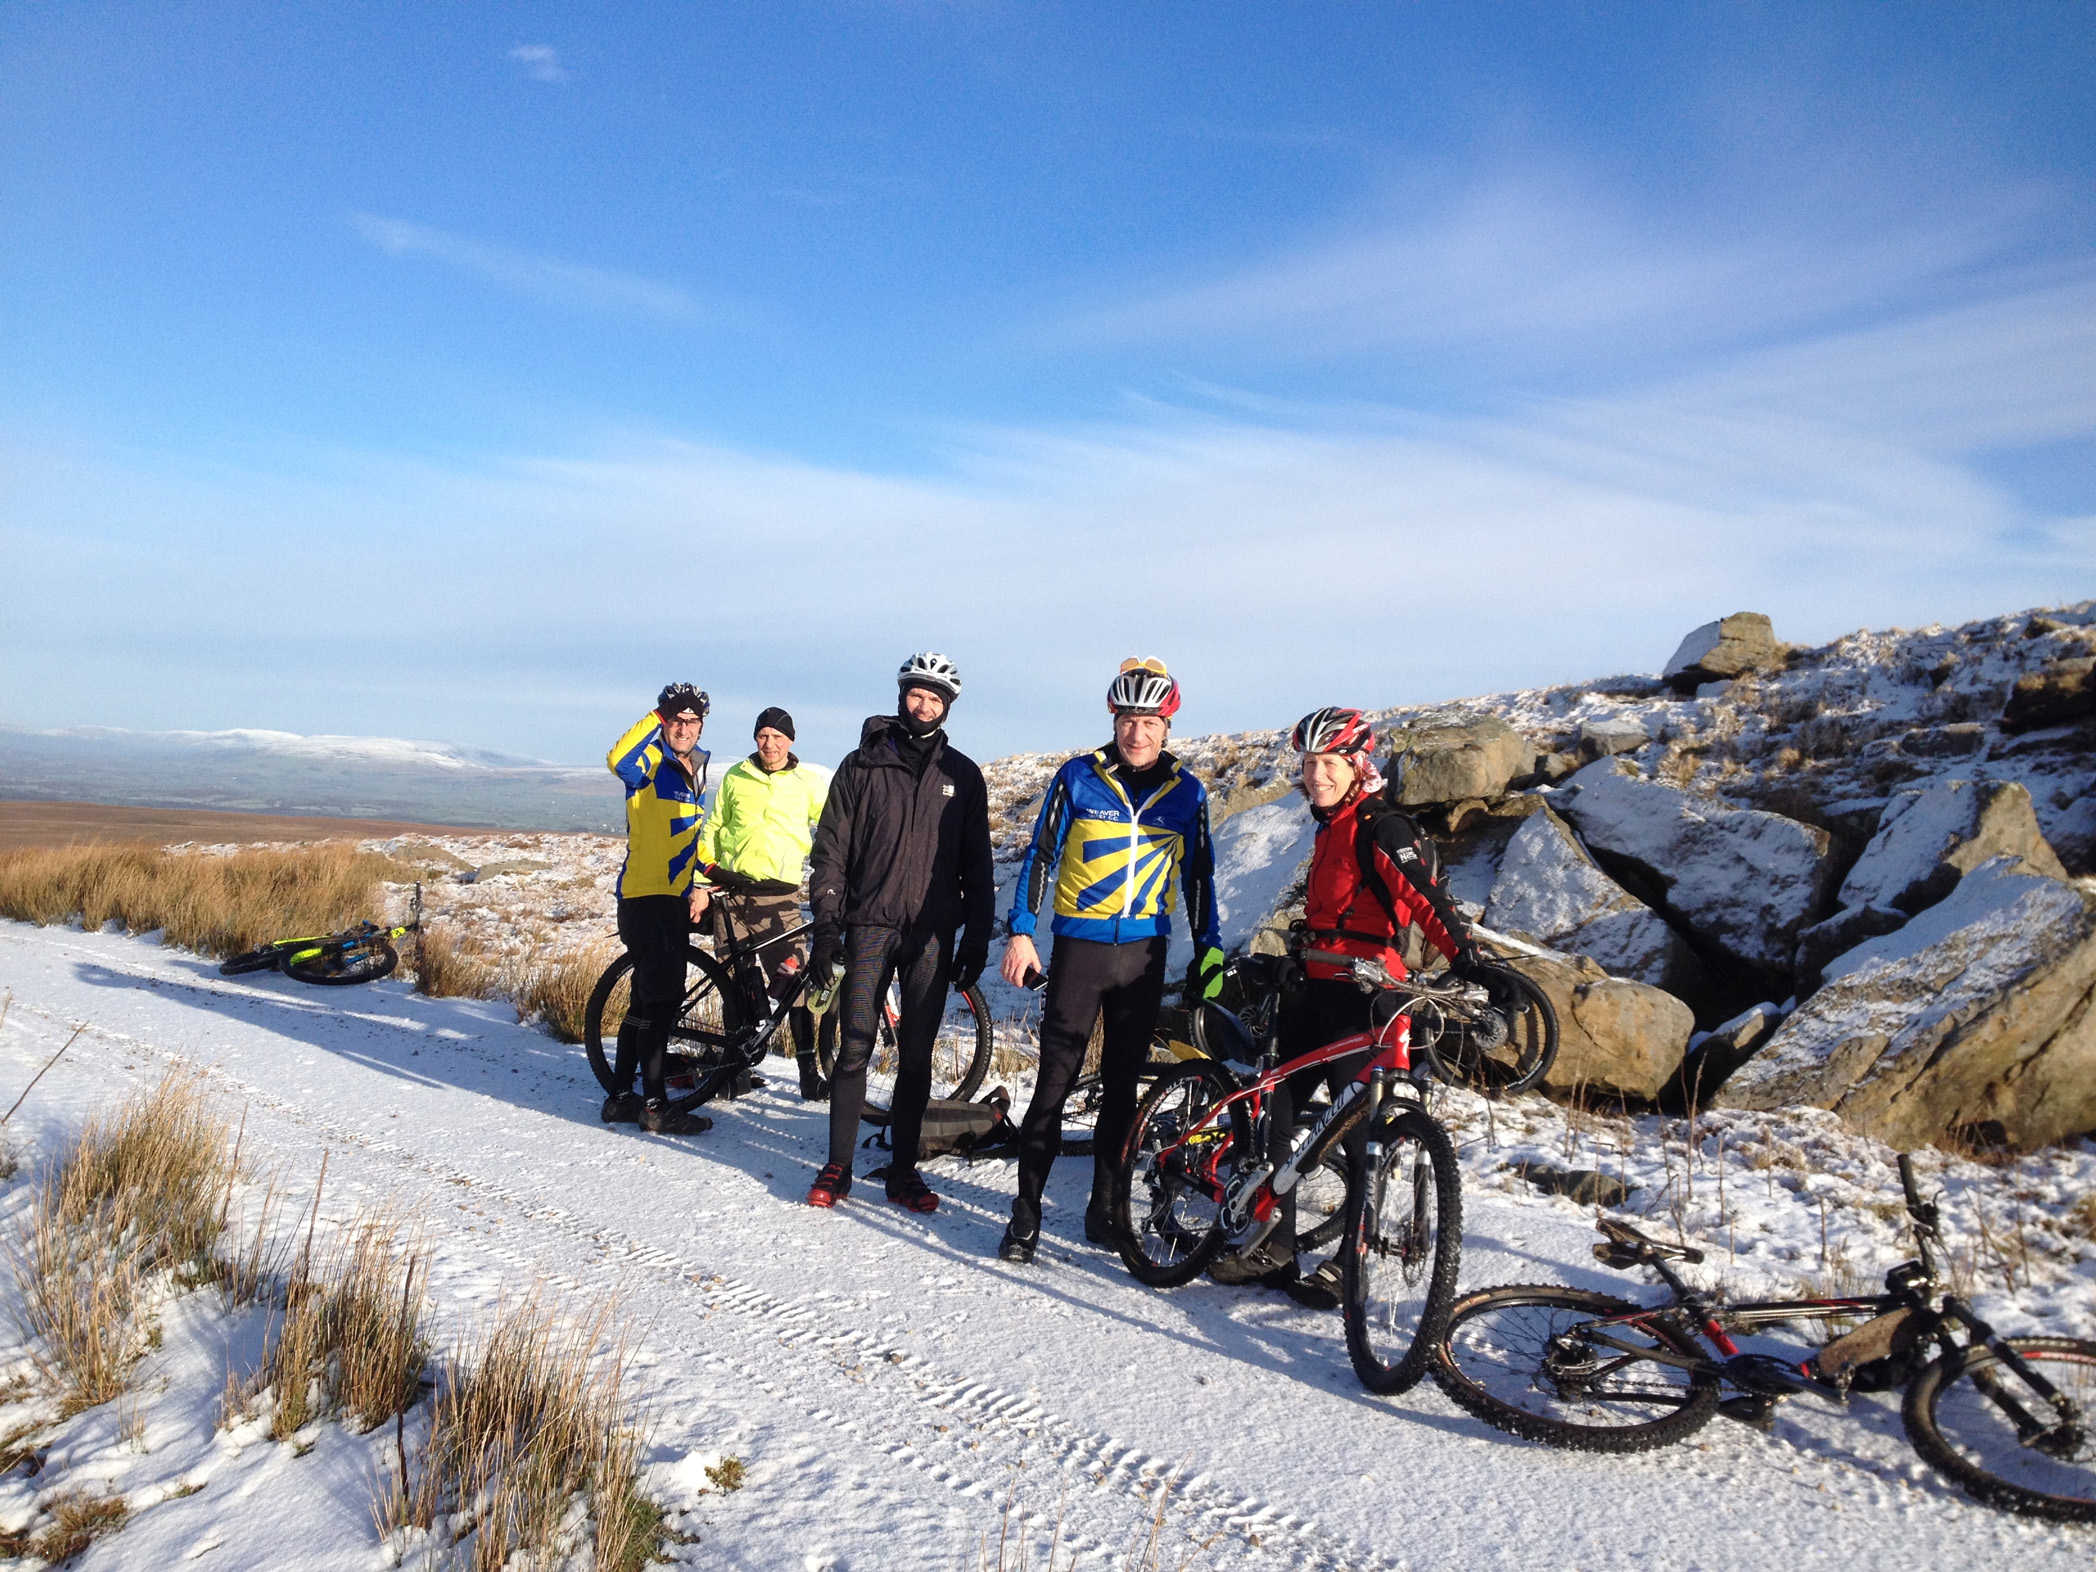 Here we all are at the highest point, enjoying the sun, snow and amazing views.